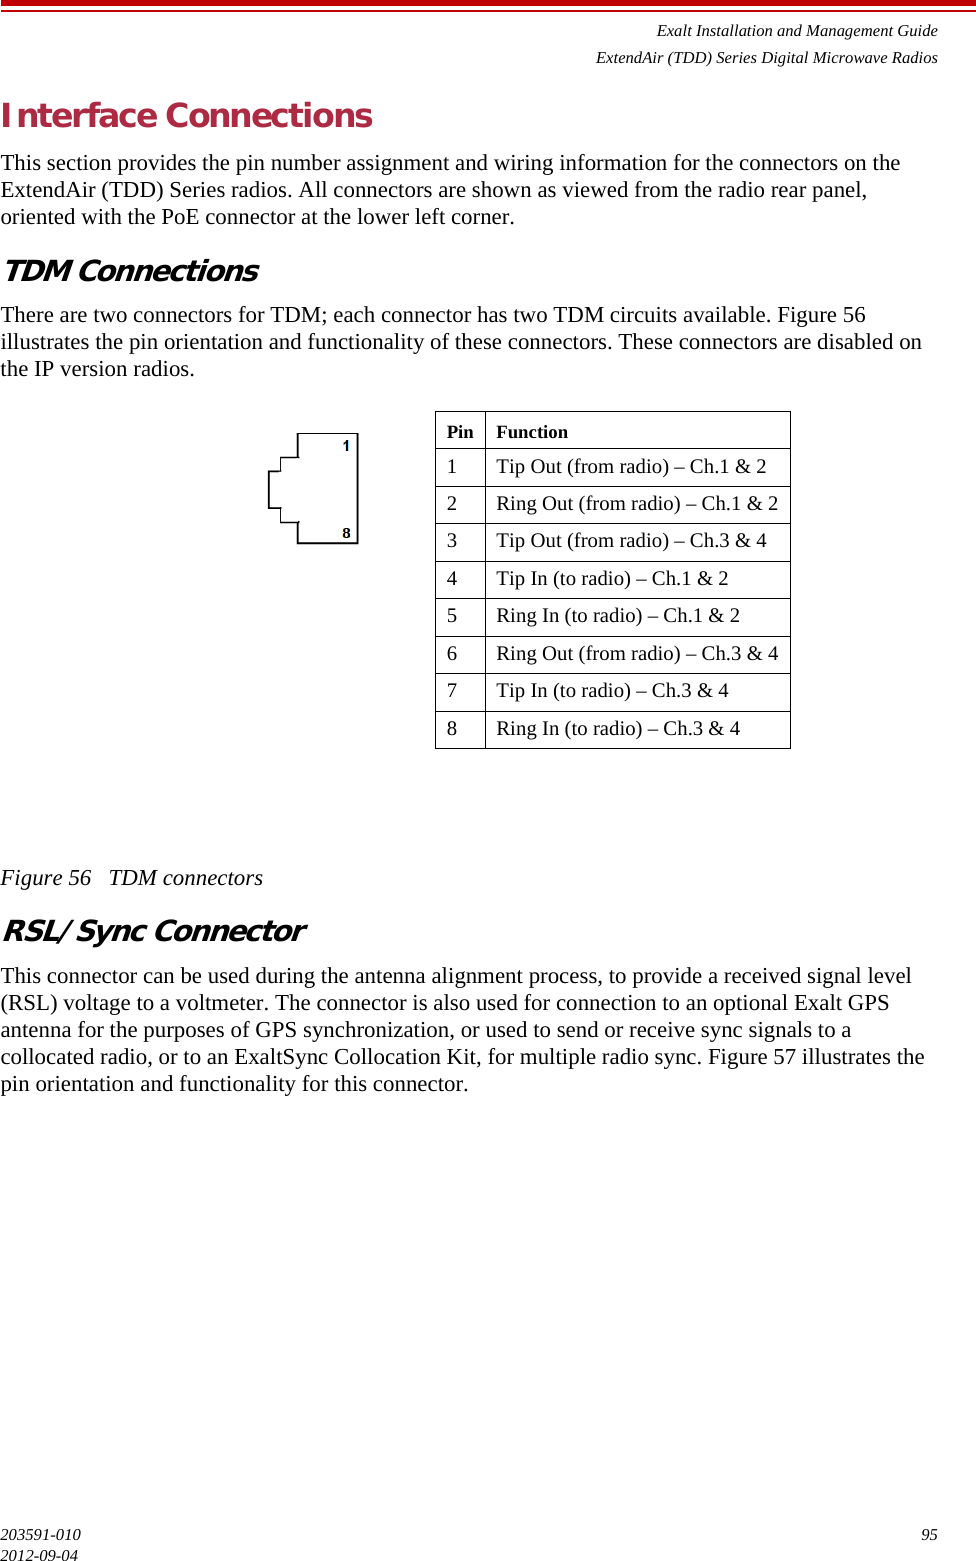 Exalt Installation and Management GuideExtendAir (TDD) Series Digital Microwave Radios203591-010 952012-09-04Interface ConnectionsThis section provides the pin number assignment and wiring information for the connectors on the ExtendAir (TDD) Series radios. All connectors are shown as viewed from the radio rear panel, oriented with the PoE connector at the lower left corner.TDM ConnectionsThere are two connectors for TDM; each connector has two TDM circuits available. Figure 56 illustrates the pin orientation and functionality of these connectors. These connectors are disabled on the IP version radios.Figure 56   TDM connectorsRSL/Sync ConnectorThis connector can be used during the antenna alignment process, to provide a received signal level (RSL) voltage to a voltmeter. The connector is also used for connection to an optional Exalt GPS antenna for the purposes of GPS synchronization, or used to send or receive sync signals to a collocated radio, or to an ExaltSync Collocation Kit, for multiple radio sync. Figure 57 illustrates the pin orientation and functionality for this connector.Pin Function1 Tip Out (from radio) – Ch.1 &amp; 22 Ring Out (from radio) – Ch.1 &amp; 23 Tip Out (from radio) – Ch.3 &amp; 44 Tip In (to radio) – Ch.1 &amp; 25 Ring In (to radio) – Ch.1 &amp; 26 Ring Out (from radio) – Ch.3 &amp; 47 Tip In (to radio) – Ch.3 &amp; 48 Ring In (to radio) – Ch.3 &amp; 4